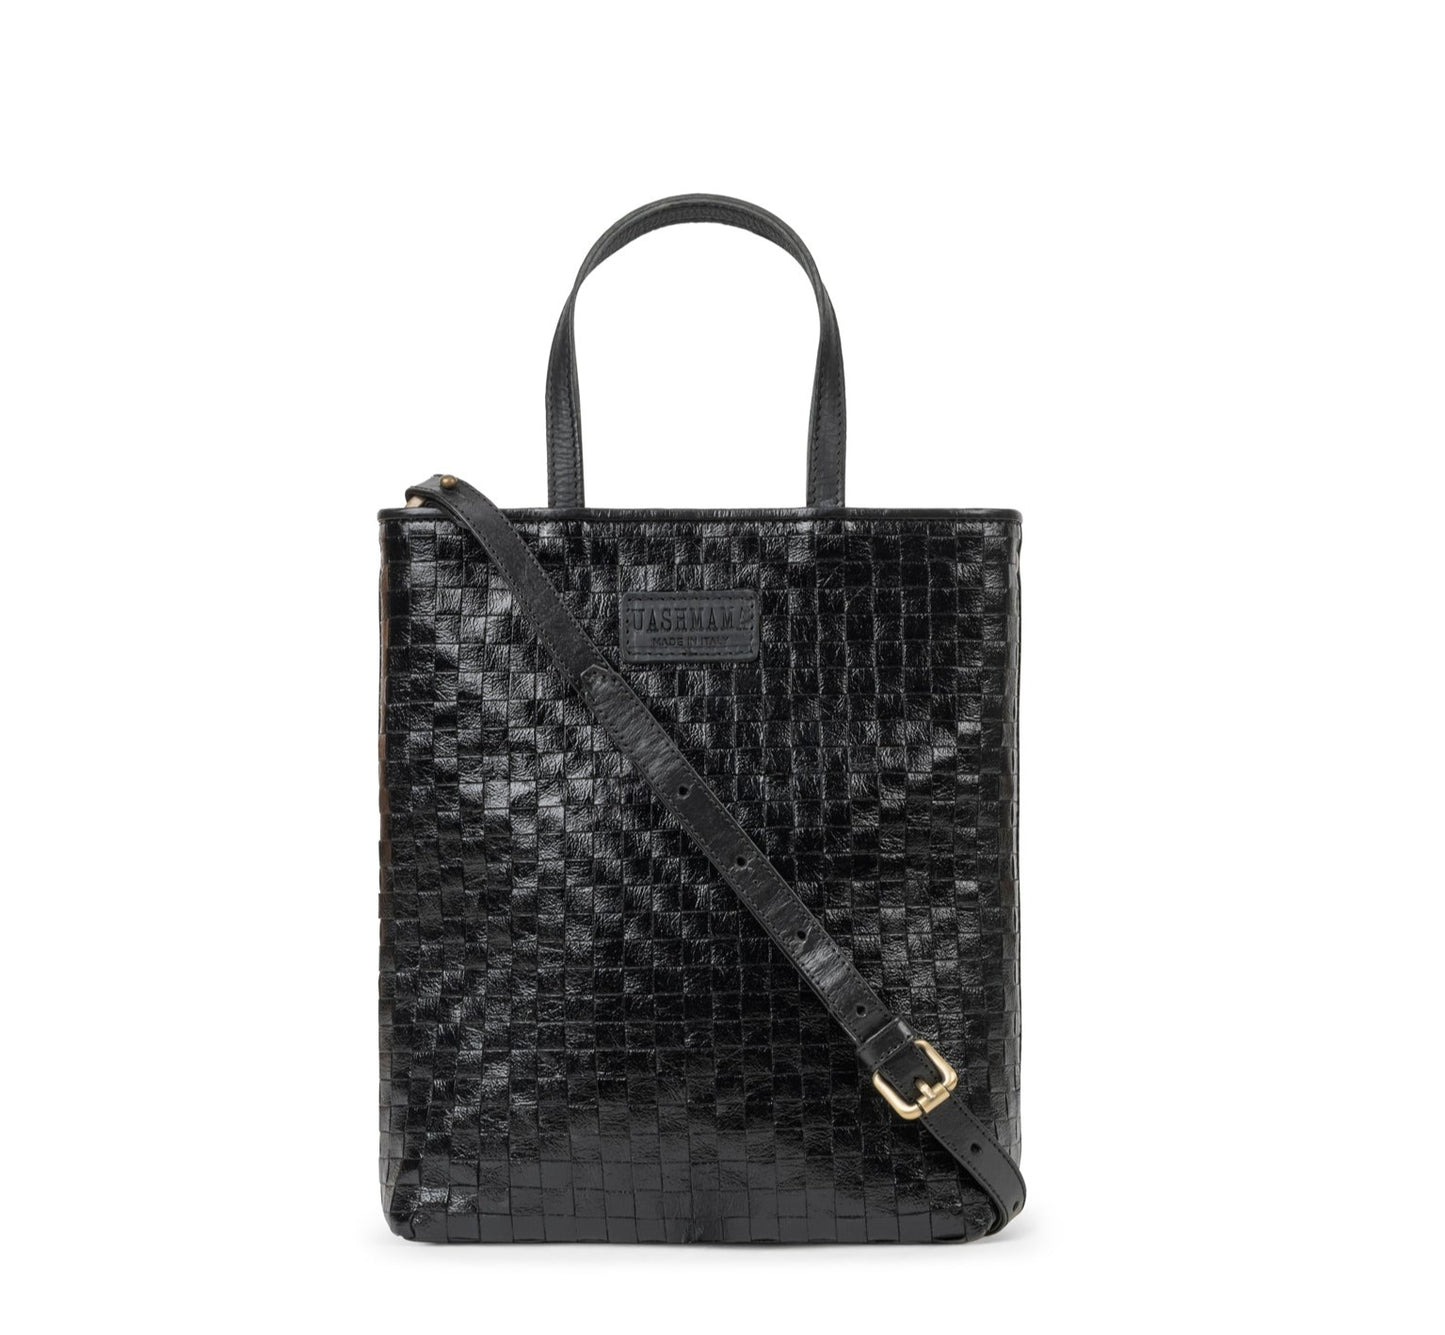 A woven washable paper tote bag is shown from the front angle. It has two top handles and a long shoulder strap. It is black in colour.